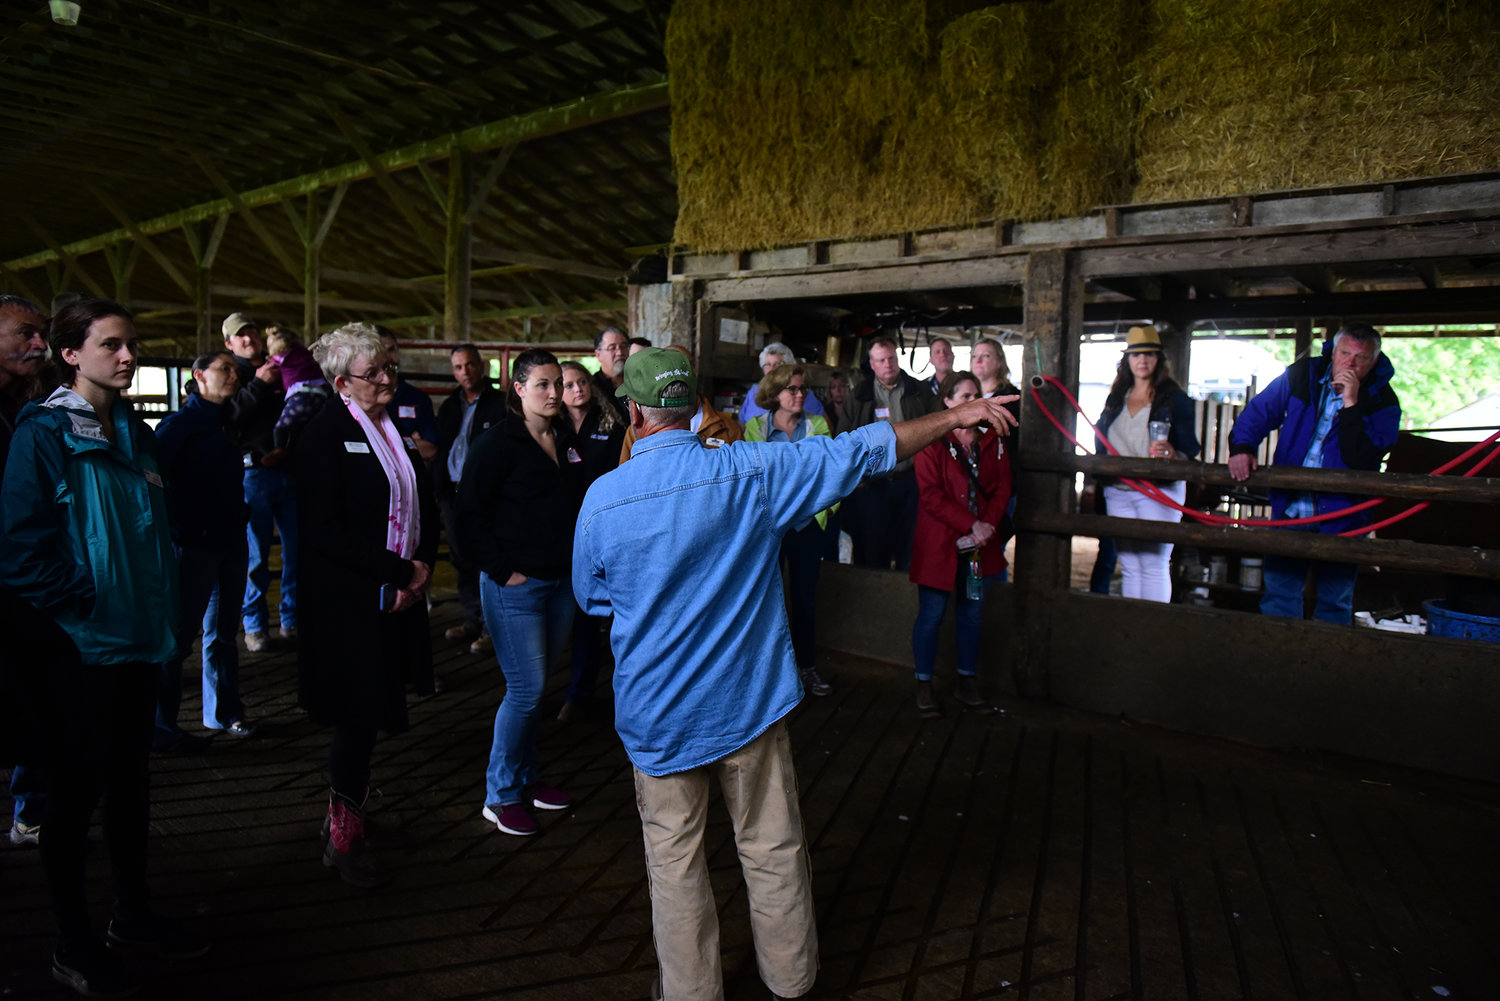 Ross McMahan, owner of the Cowlitz Meadows Dairy, talks to regional leaders about his operation and the challenges he faces during the Lewis County Farm Bureau Tour of Ag Wednesday afternoon.